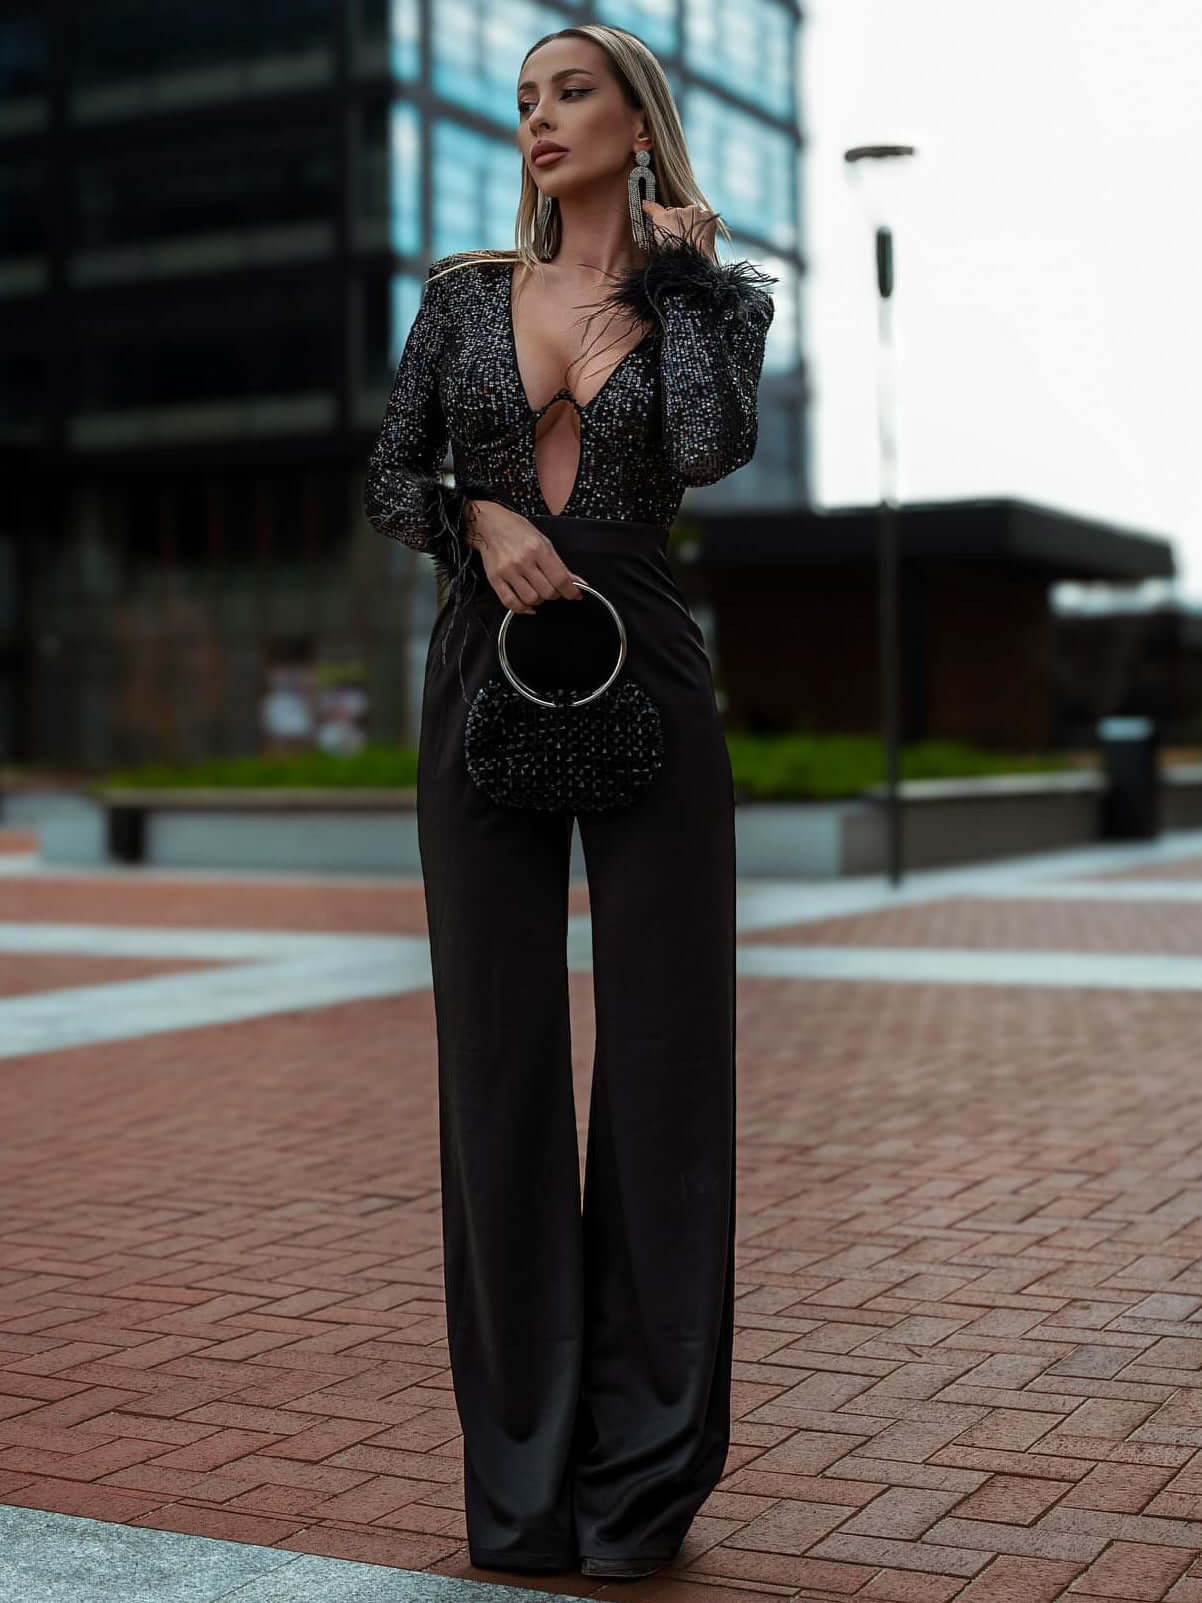 Shimmering long sleeve jumpsuit adorned with sequins and feather embellishments